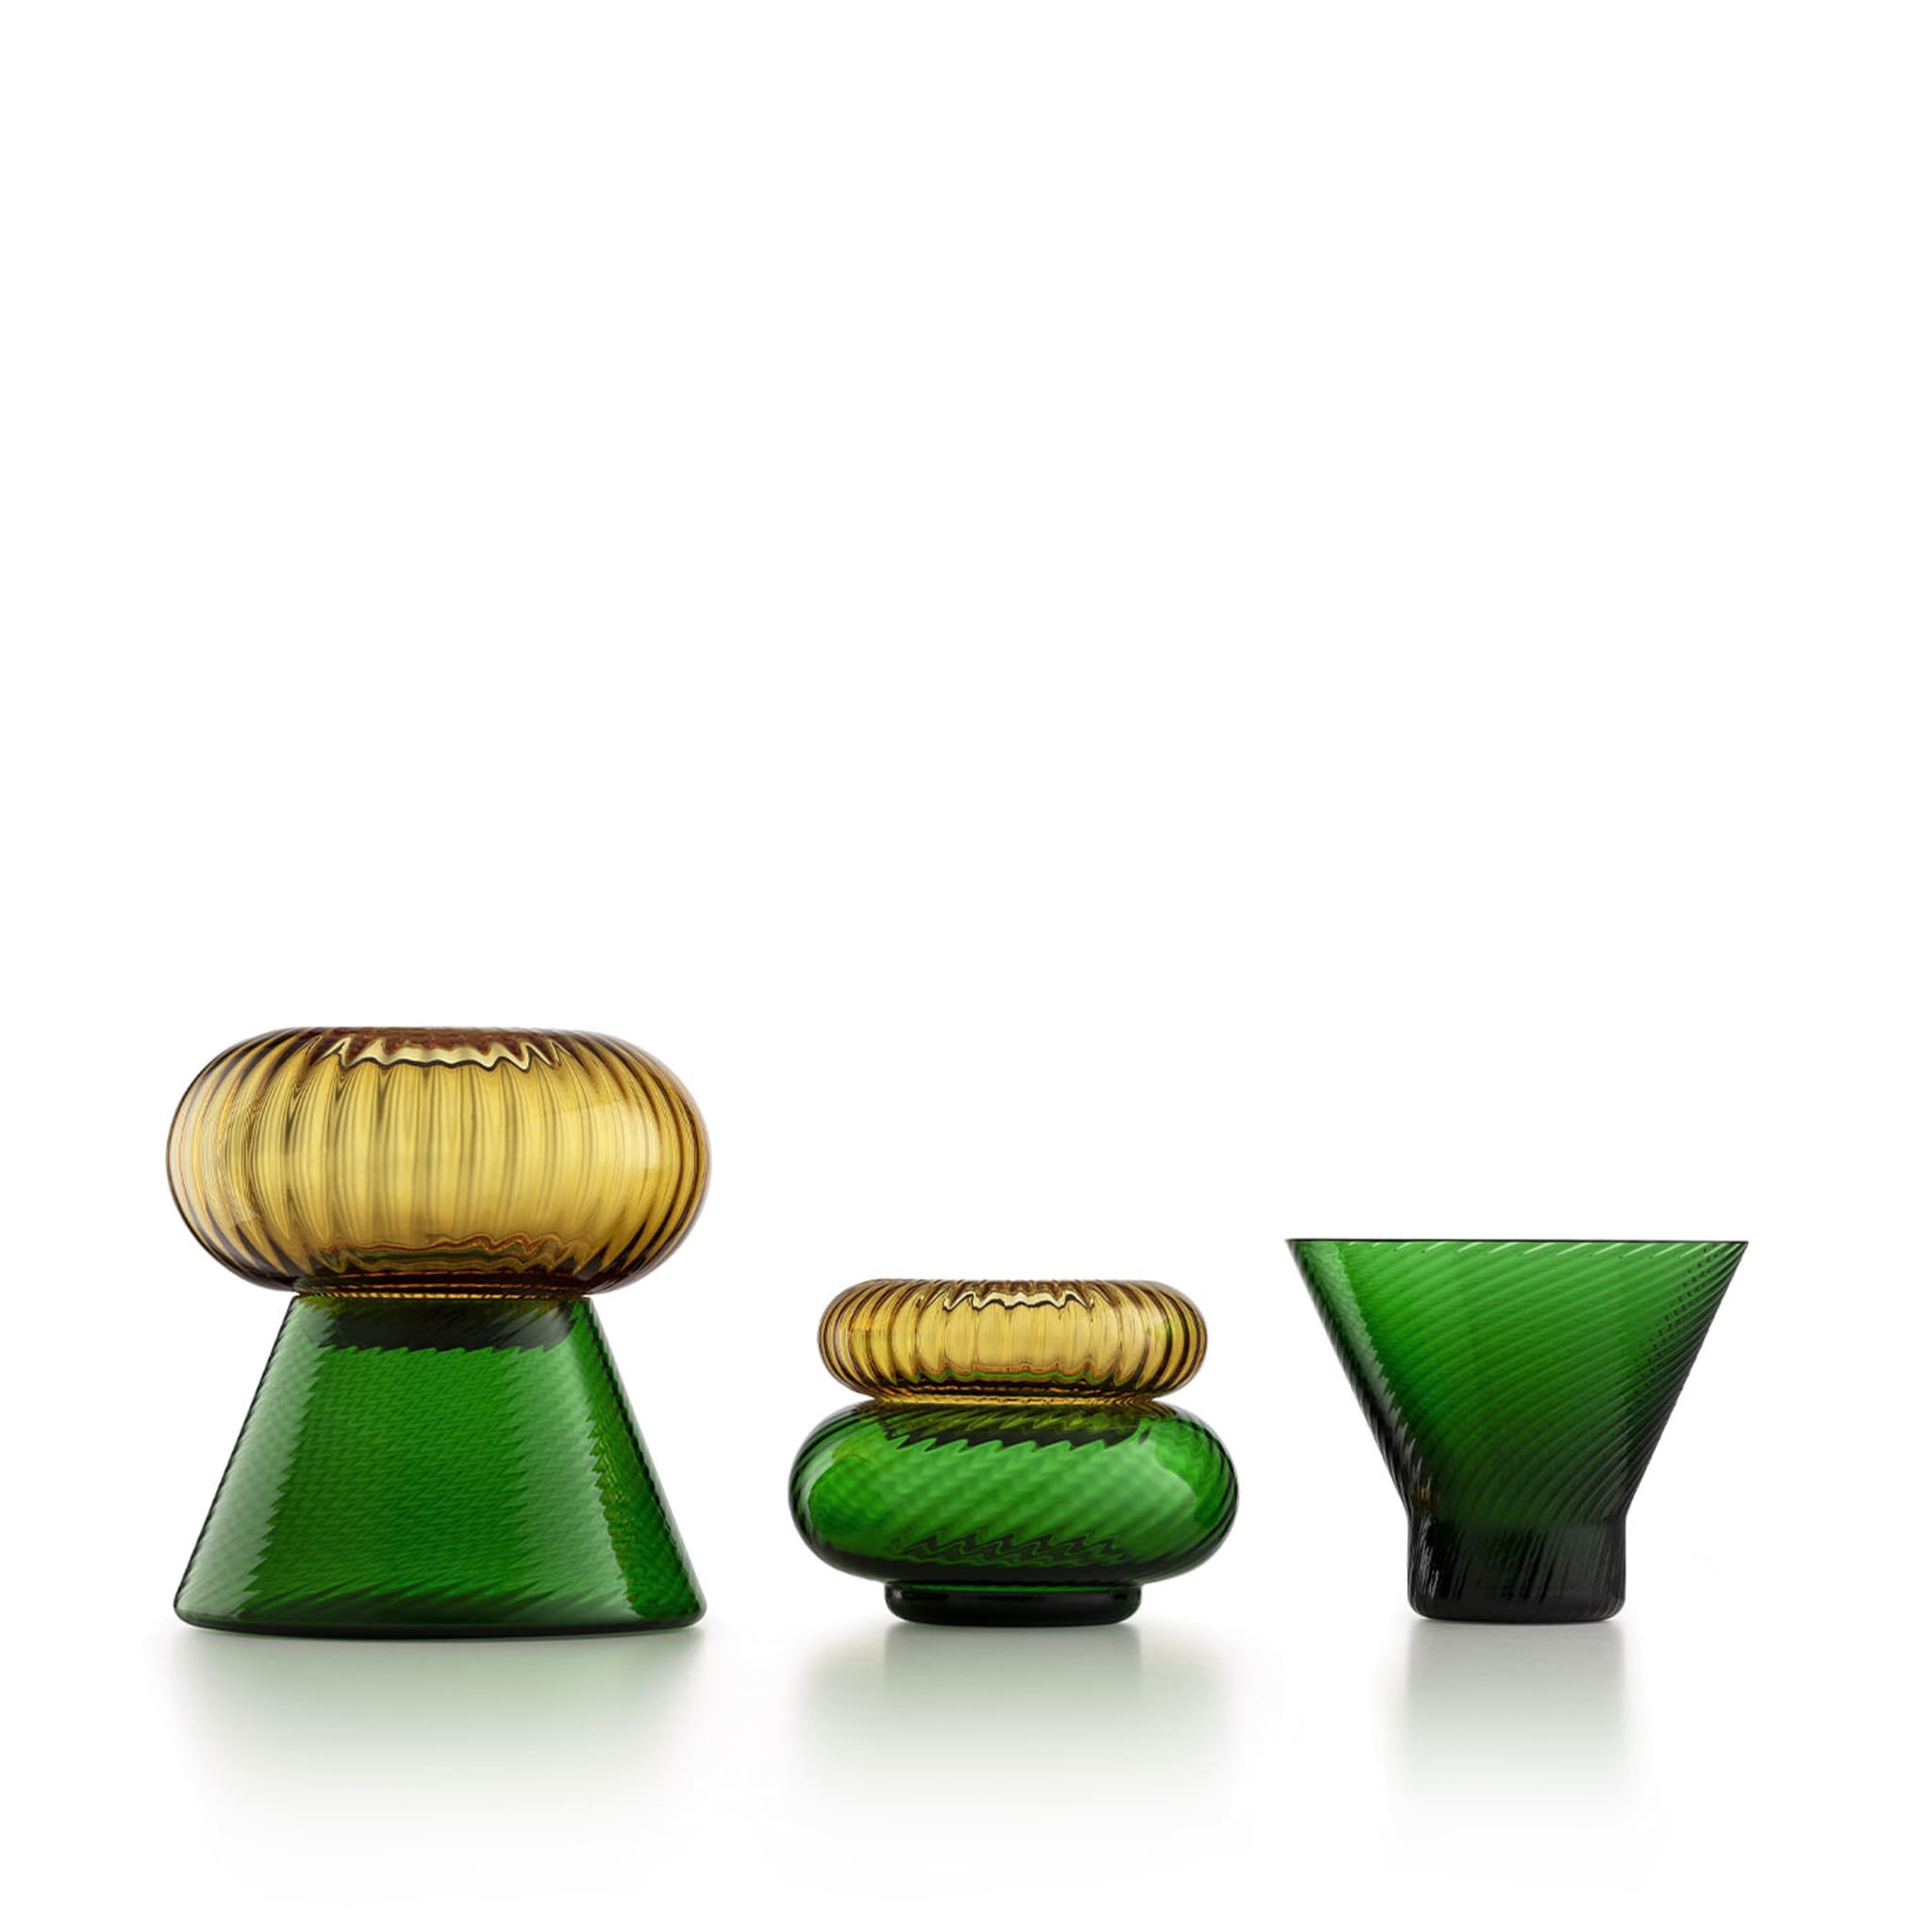 Issey Set of 5 Green and Amber Vases By Matteo Zorzenoni - Alternative view 5